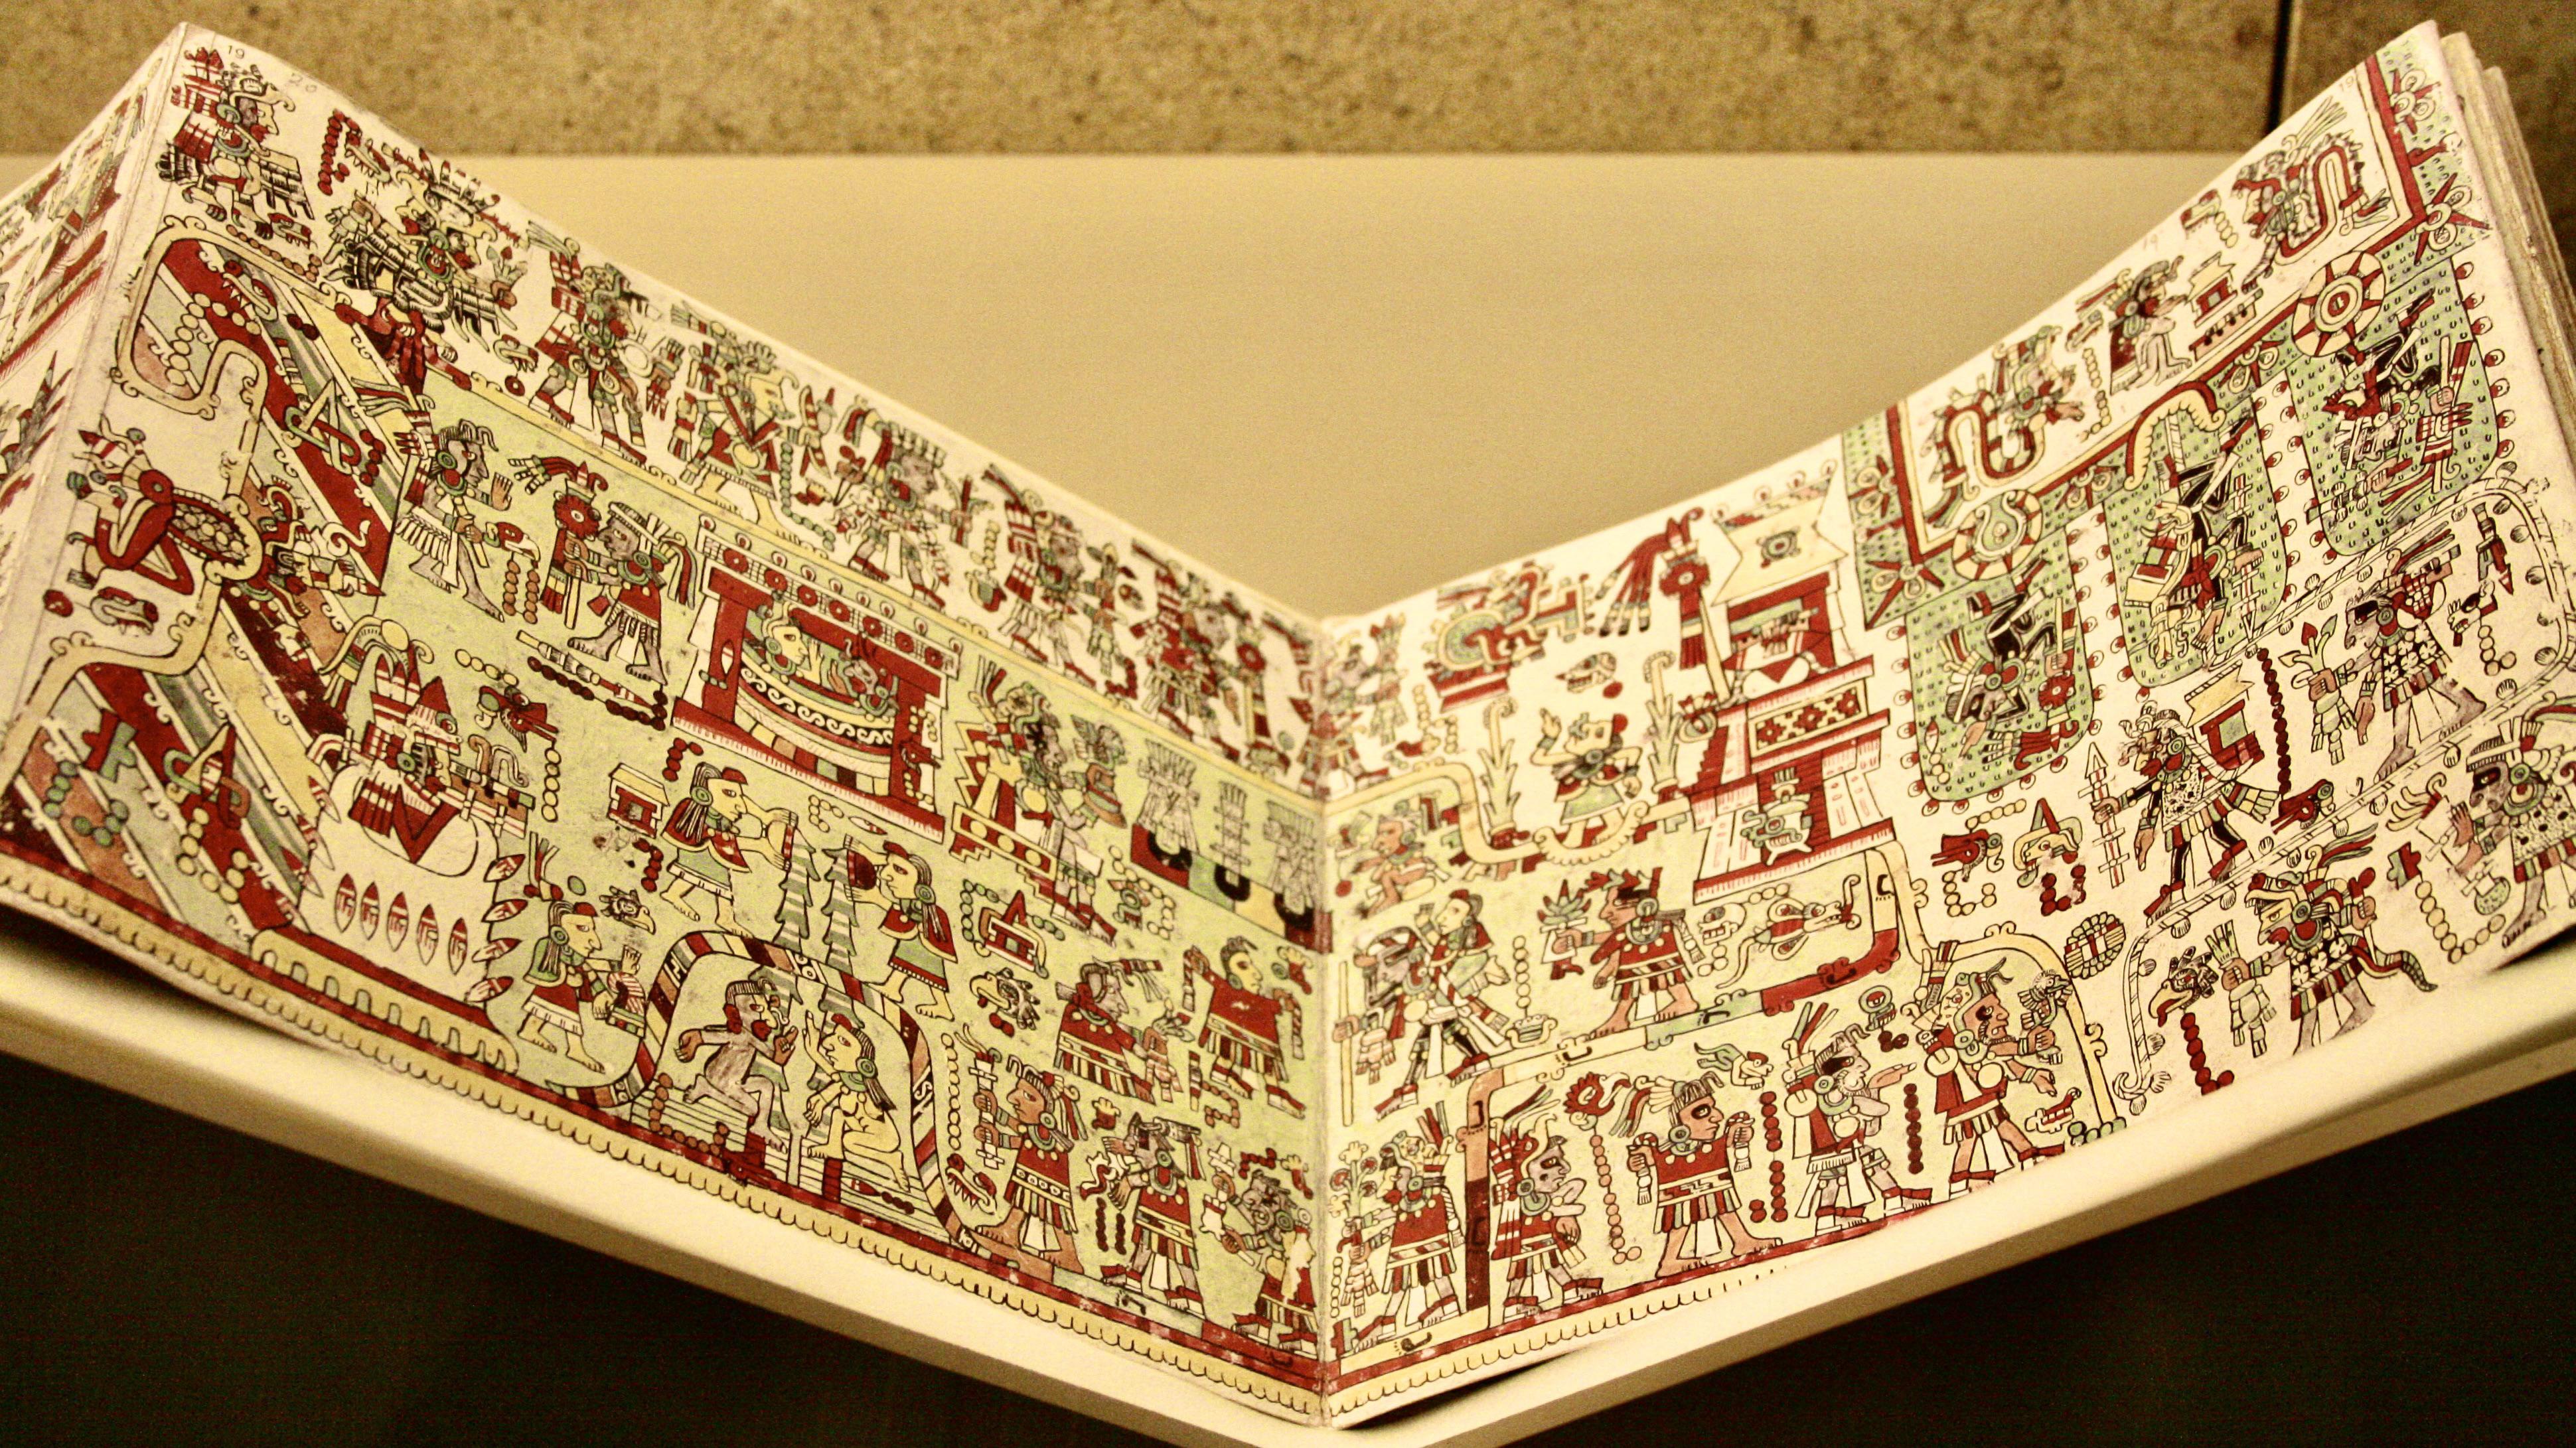 Codex Zouche-Nuttall, A Mixtec codex that records the genealogies, alliances, and conquests of multiple 11th and 12th century rulers of a small Mixtec city-state in Oaxaca, the Tilantongo kingdom.jpg